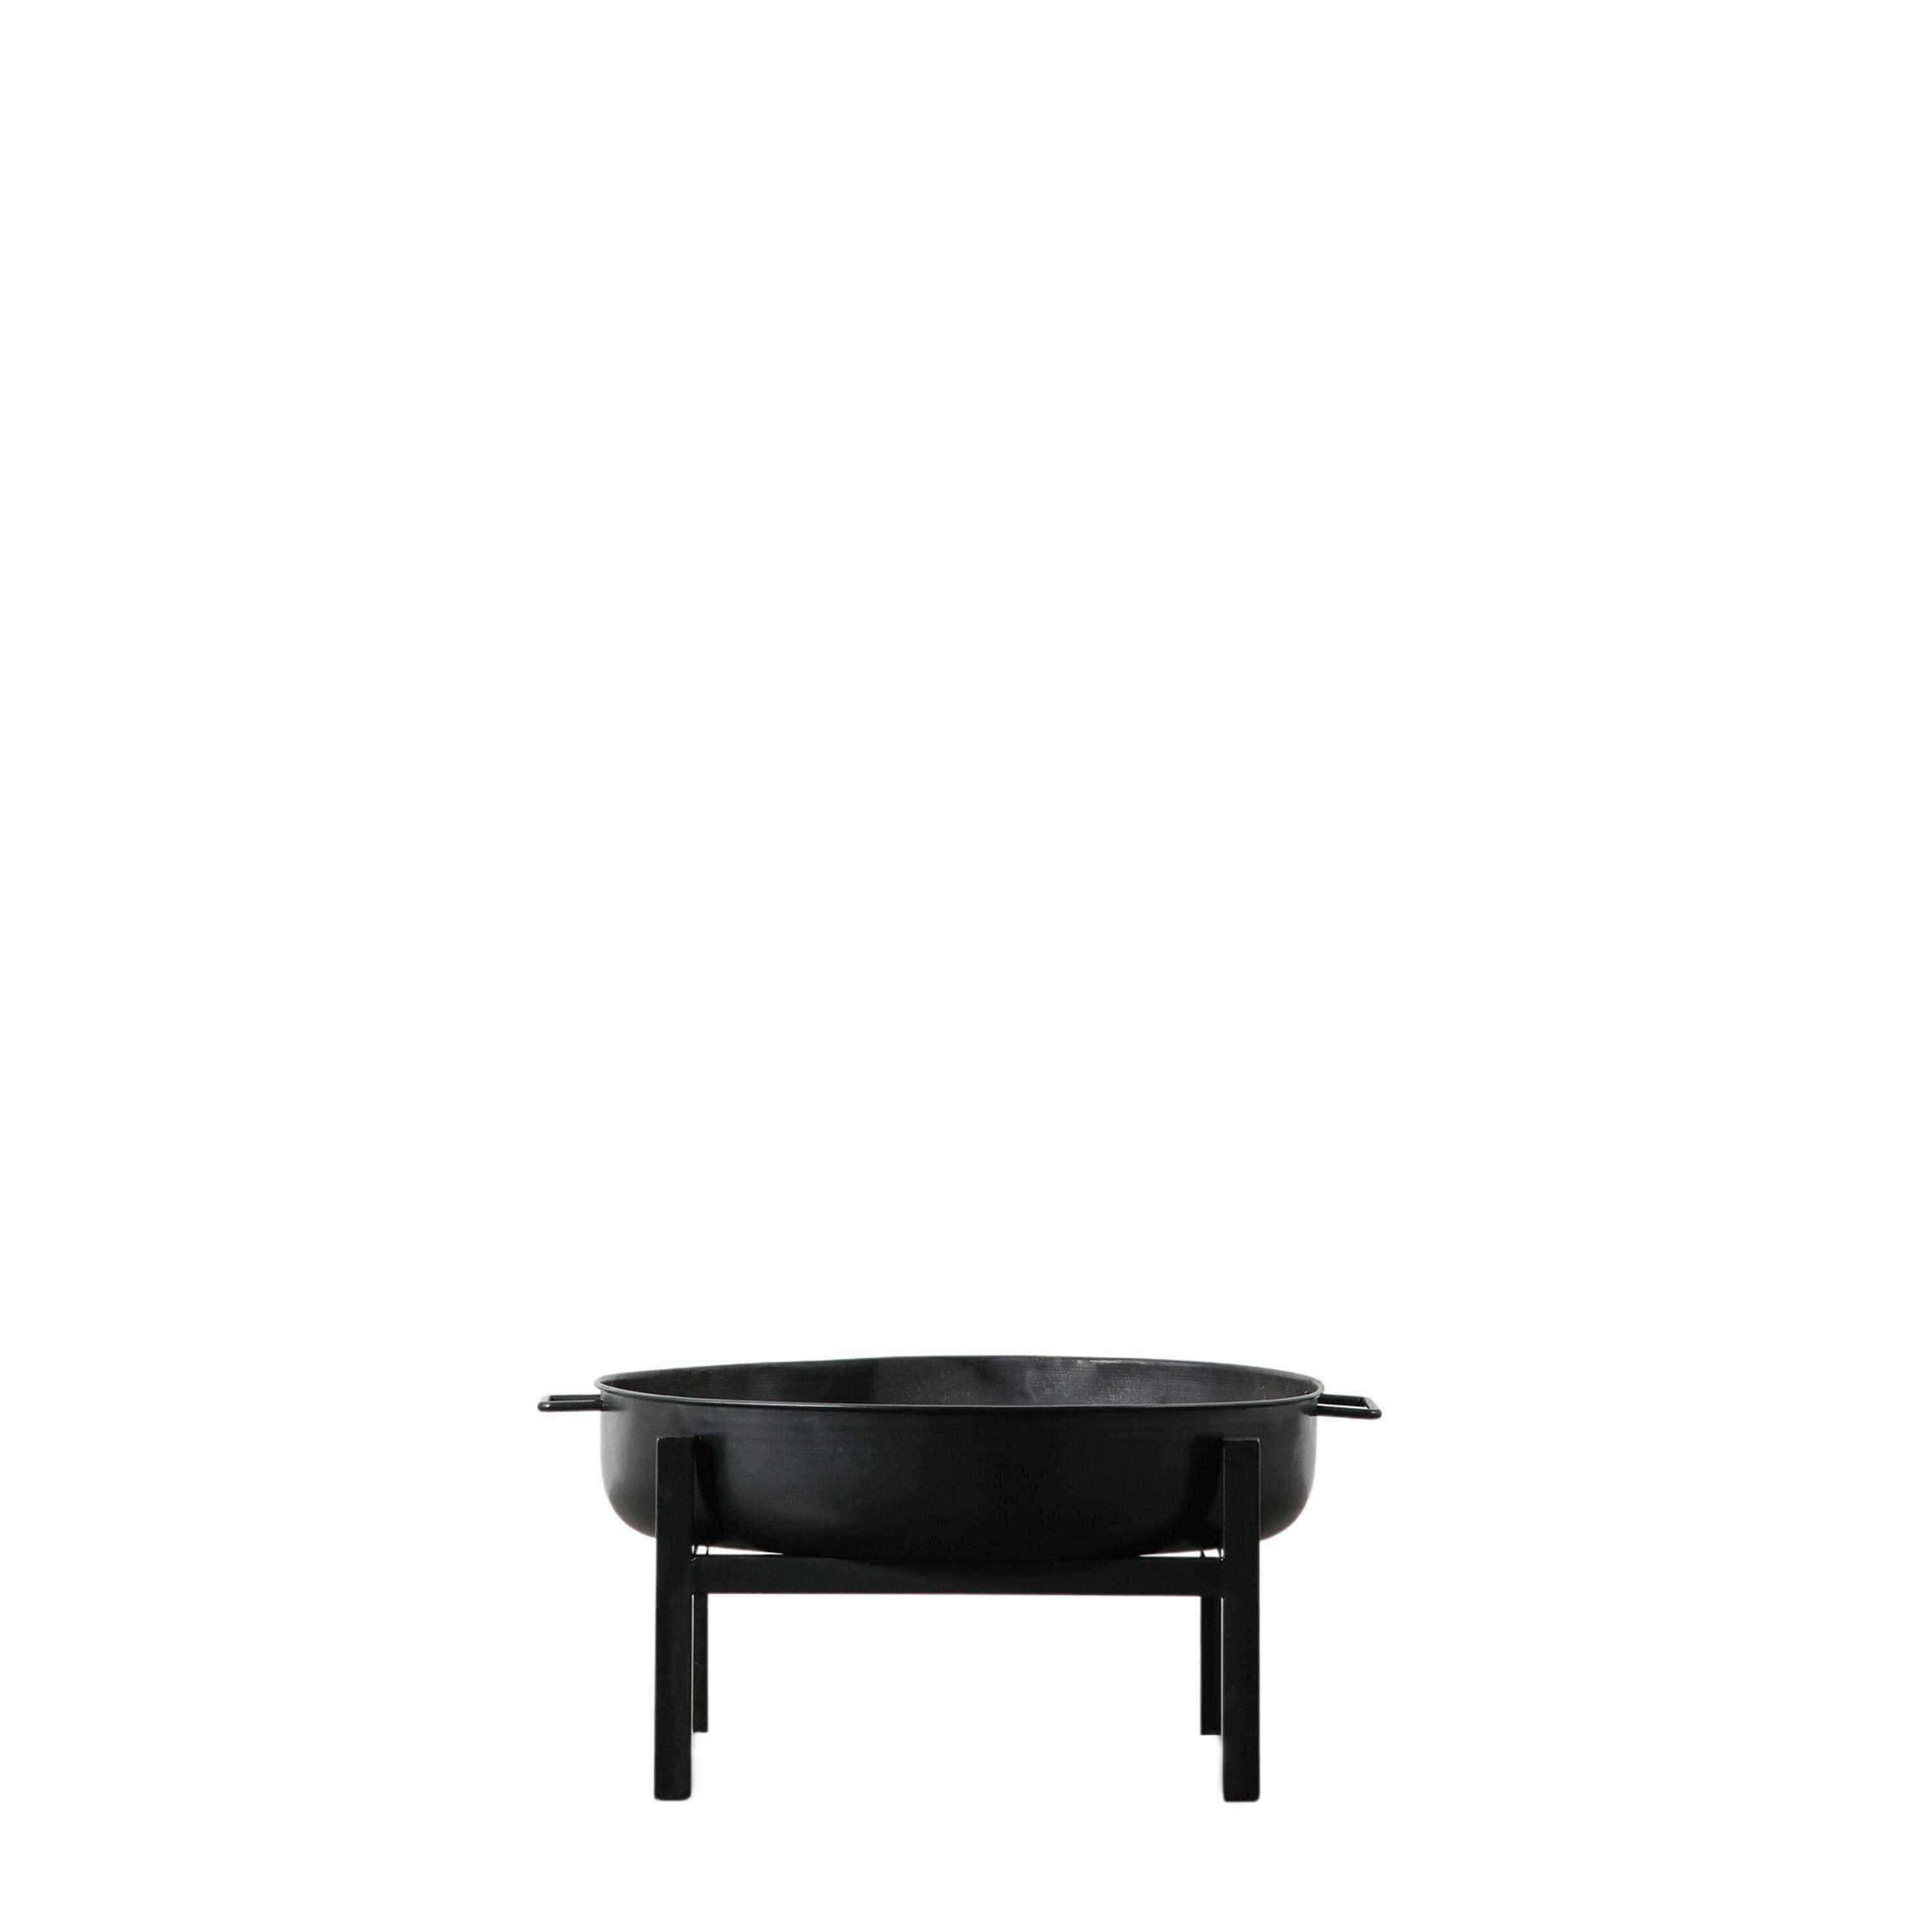 Contemporary Style Round Iron Fire Pit - The Farthing